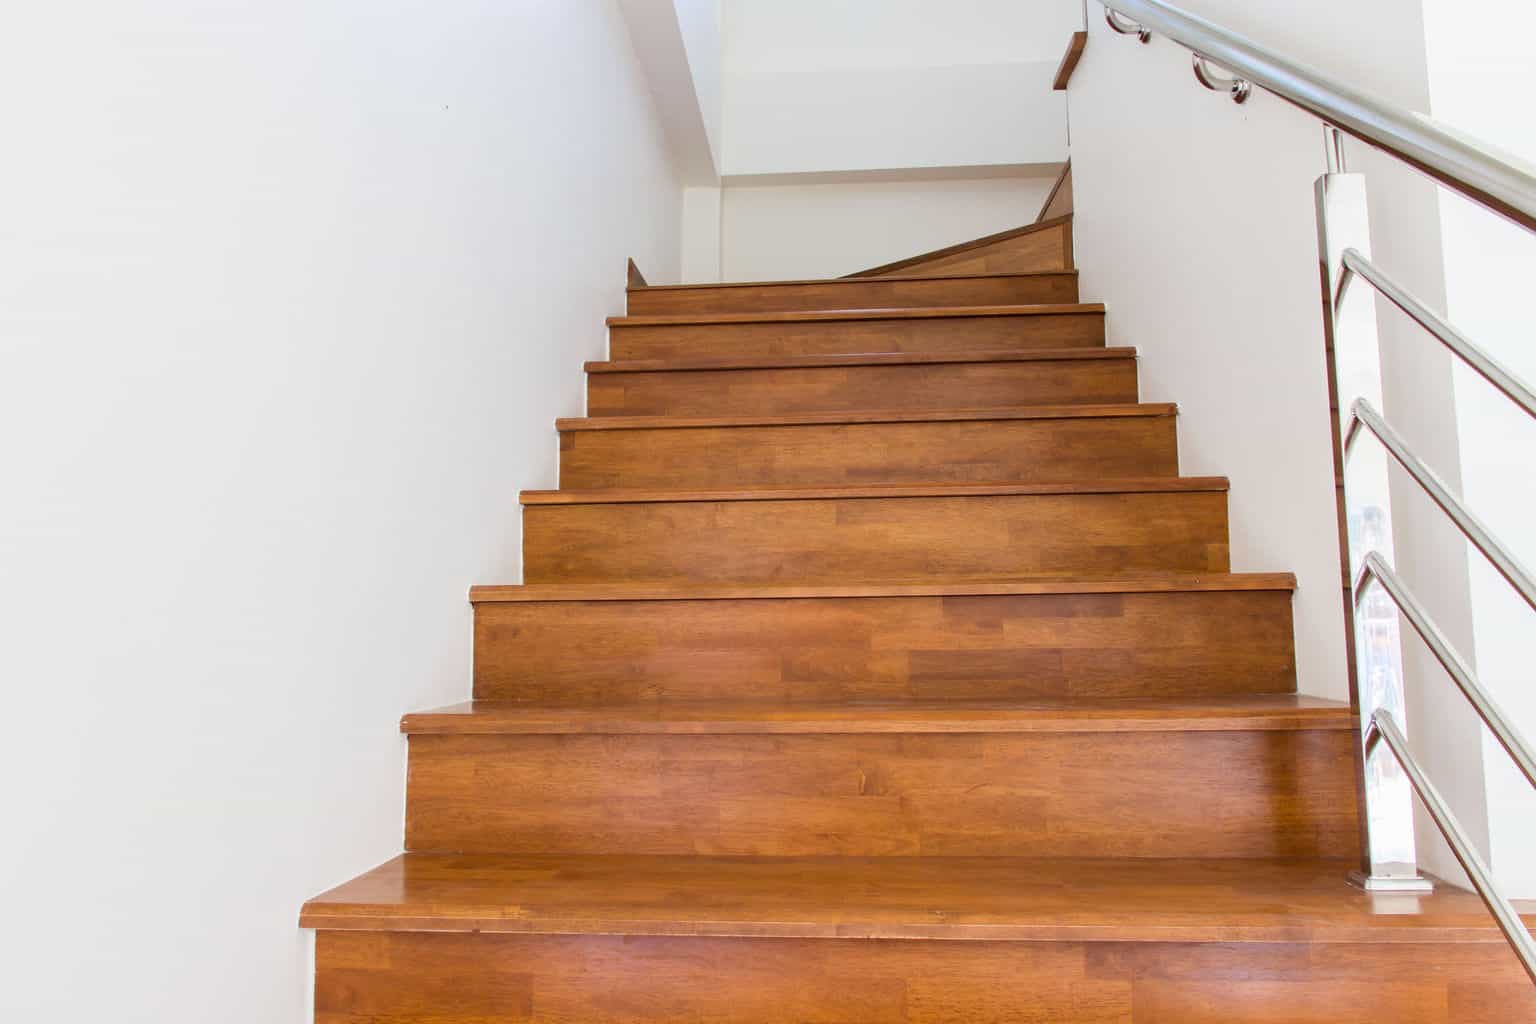 Surprisingly Bud Customer 5 Reasons You Should Install Laminate Flooring On Stairs - The Flooring Lady